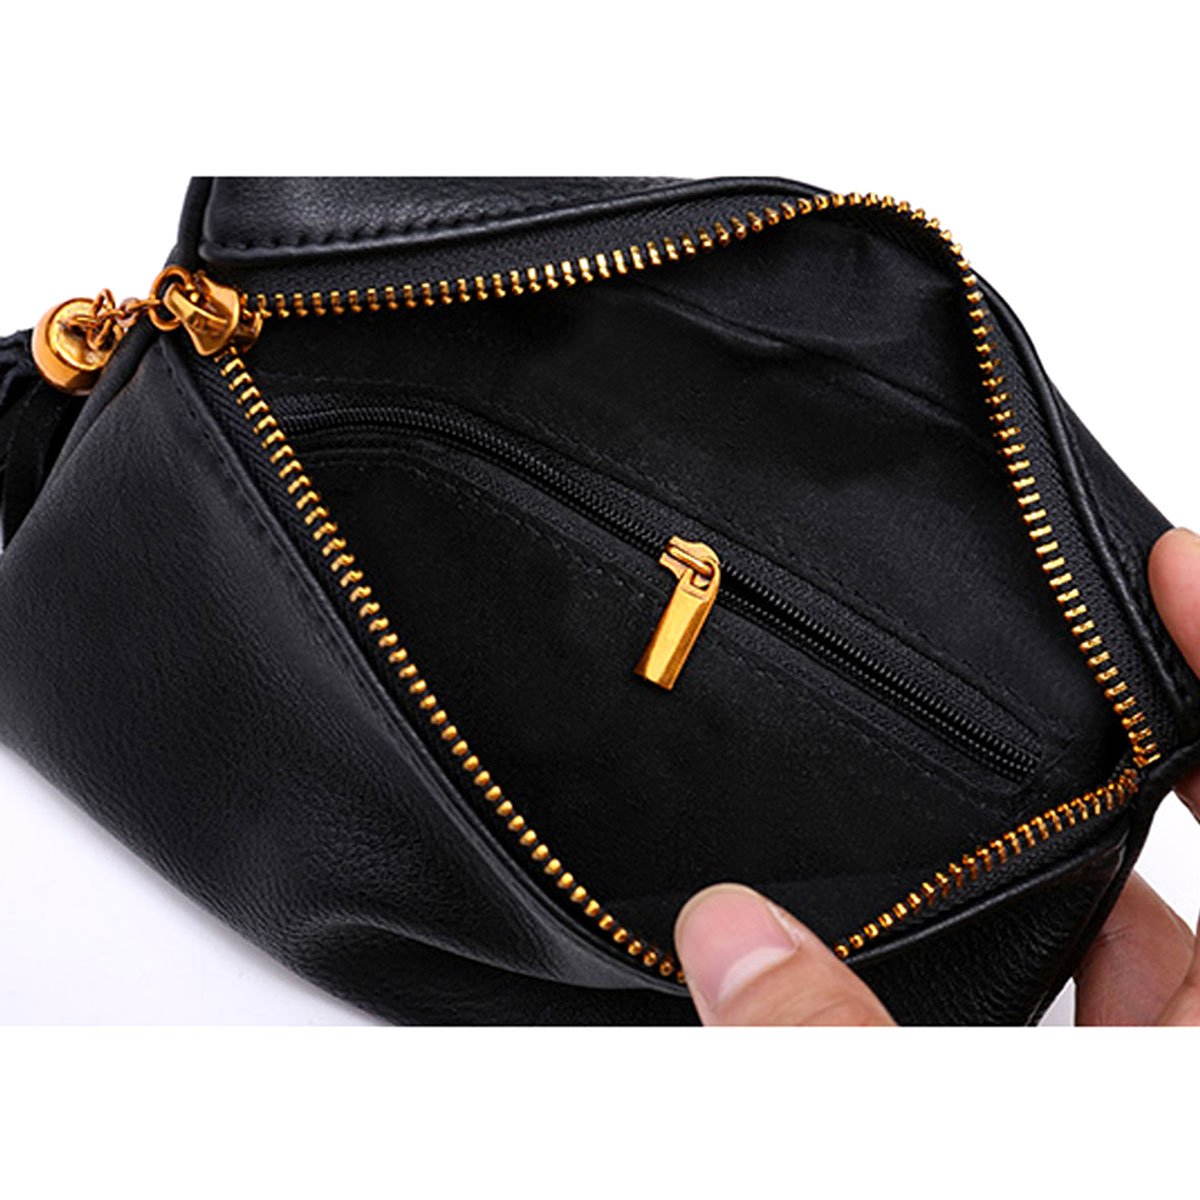 Rebecca Women Girls PU Leather Fanny Pack Casual Waist Bag Tassels Cell Phone Pocket with Removable Belt